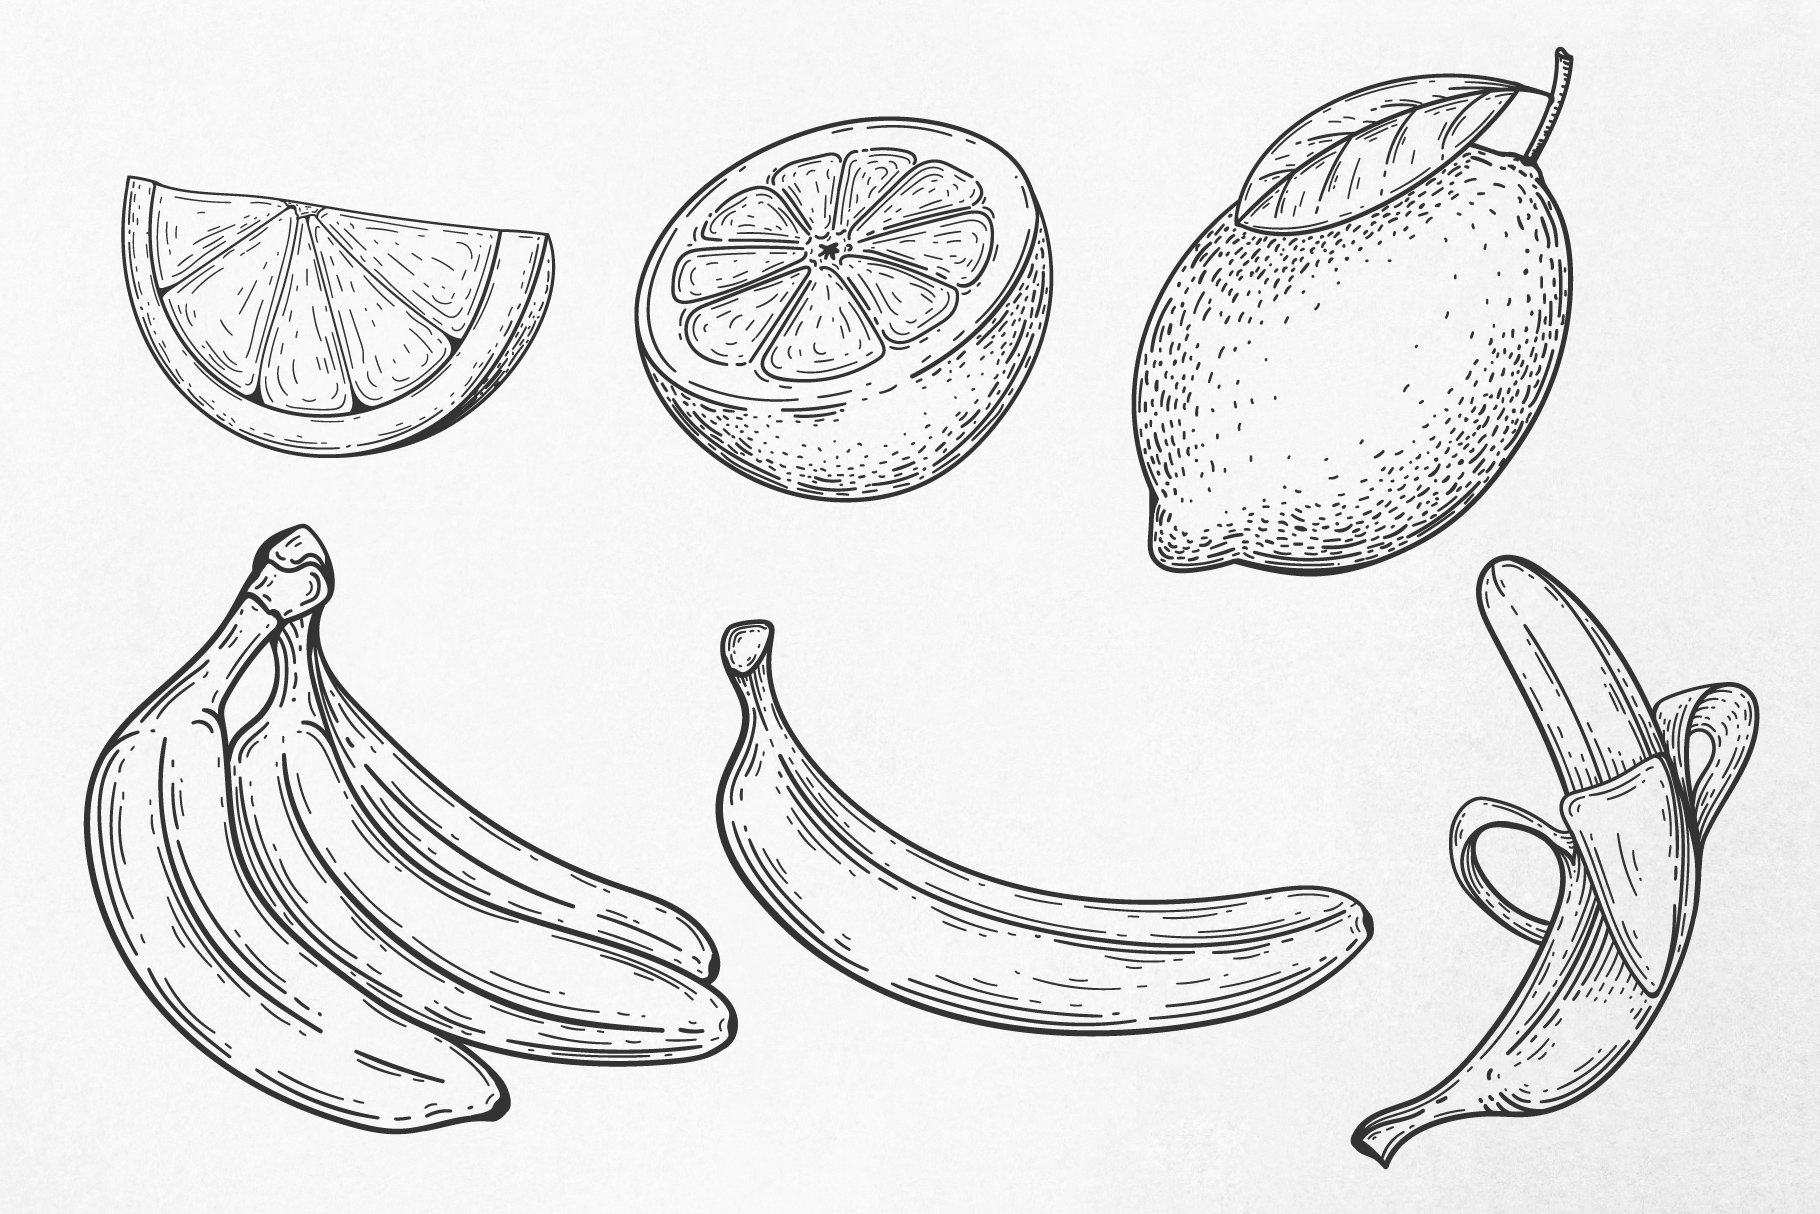 How to draw a vegetables step by step | Fruit drawings - YouTube | Fruits  drawing, Easy drawings, Vegetable drawing